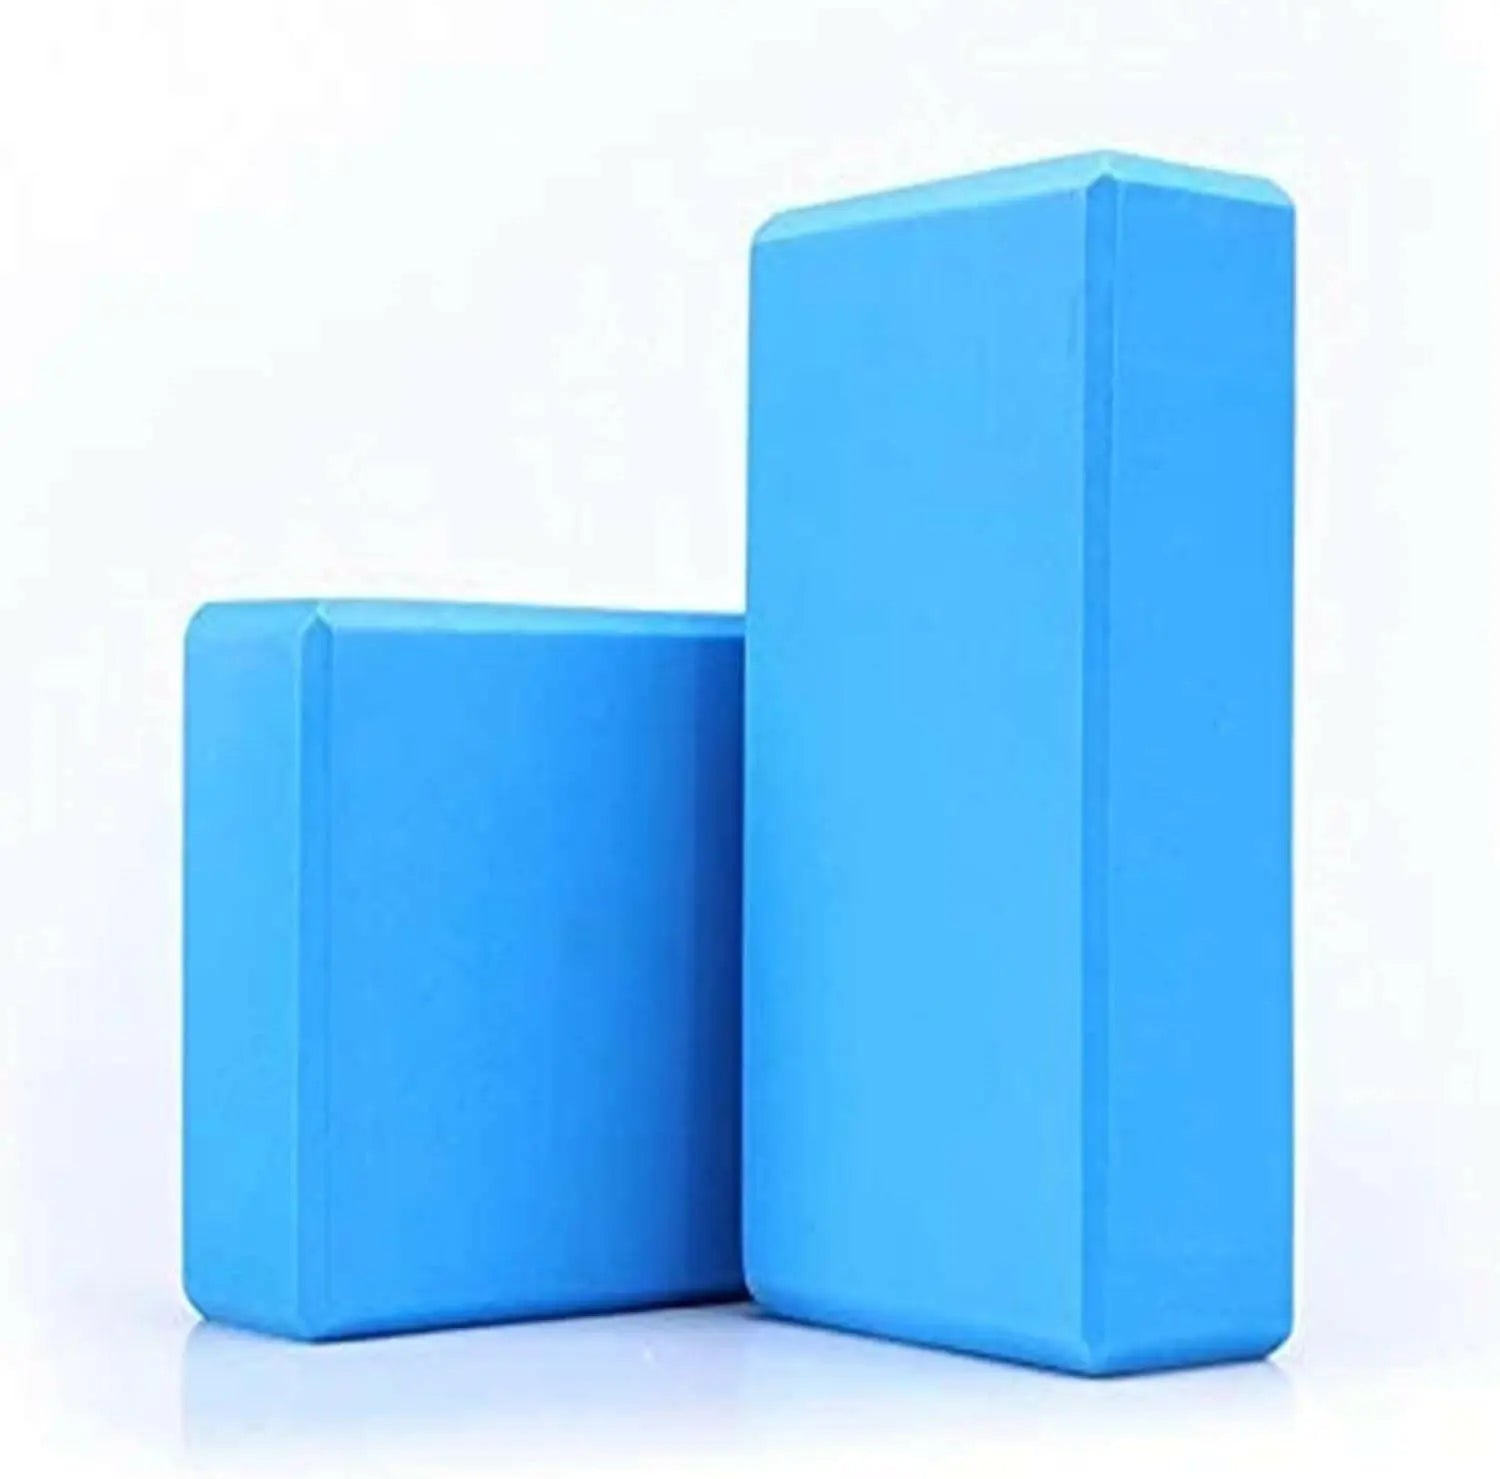 SKY-TOUCH Yoga Block Brick 2 Pack, Non Slip Yoga Block Brick Foam Home Exercise Fitness Gym High Foam for Stretching Yoga/Pilates/Fitness 9"x6"x3"